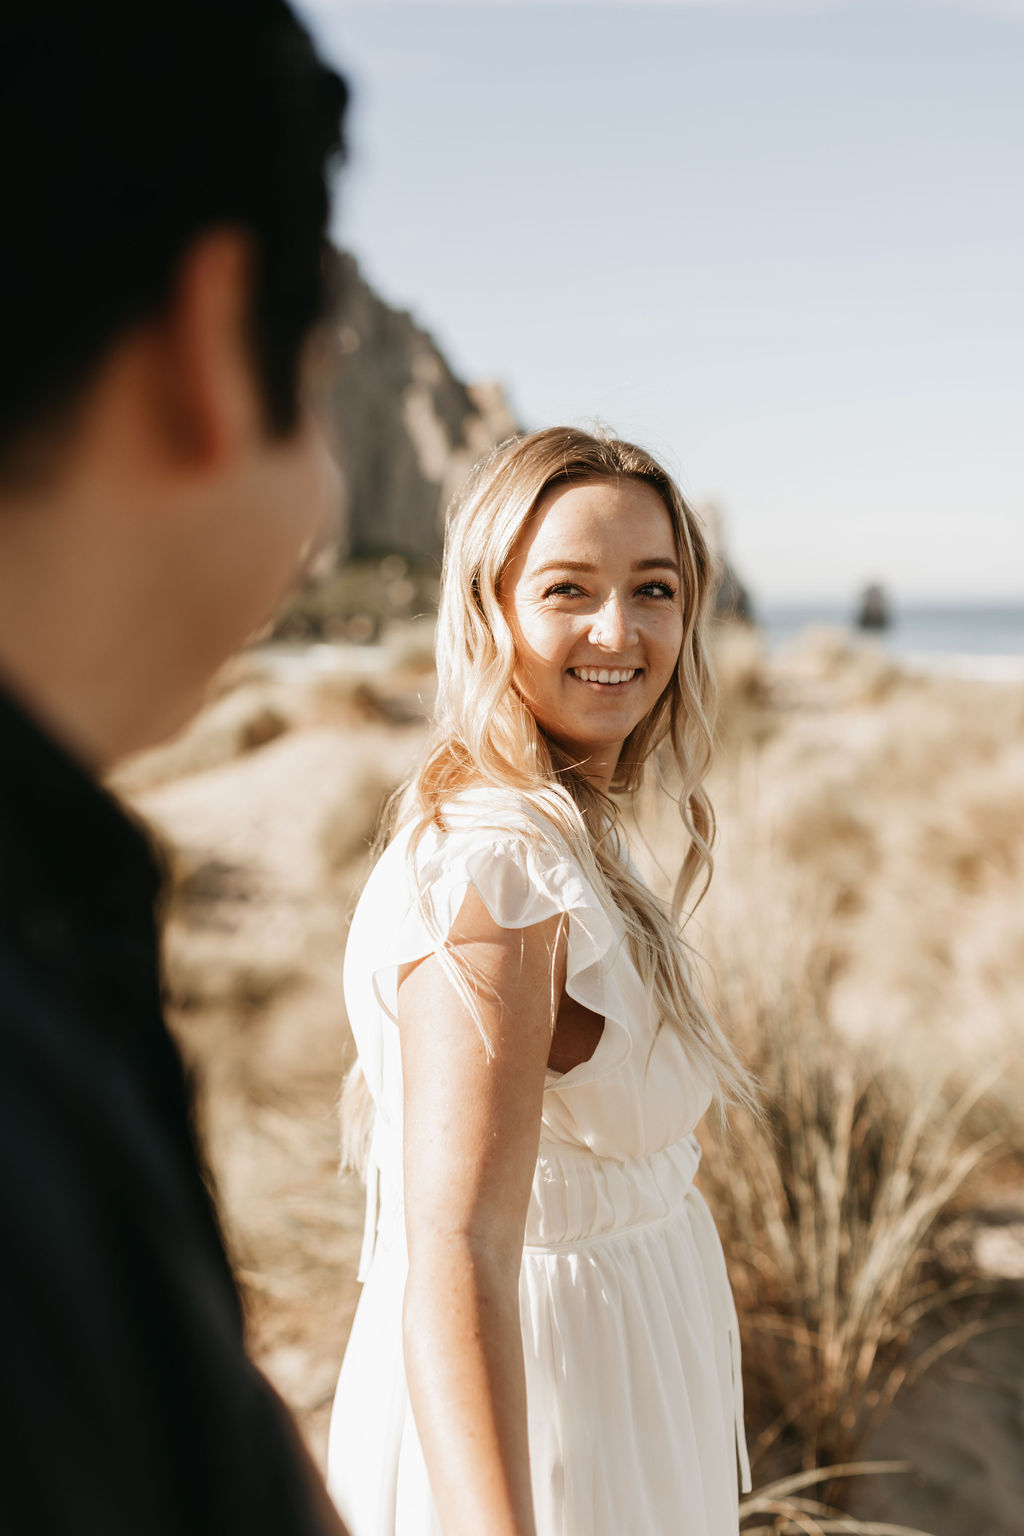 Bright and Sunny Beach Engagement Photoshoot | Hailee & Brian